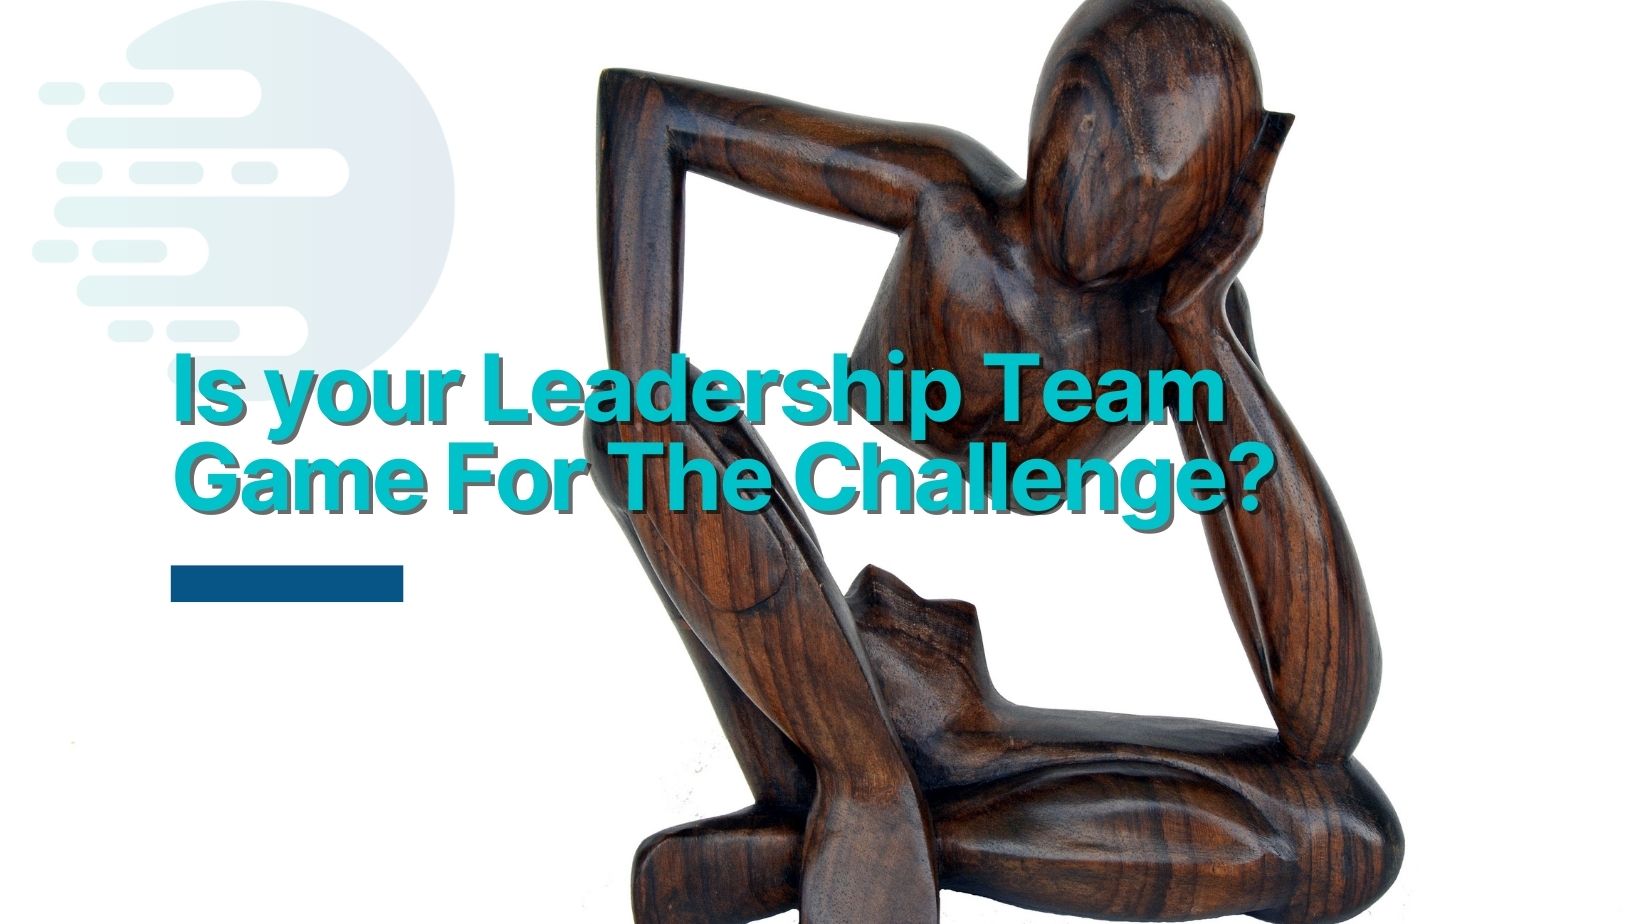 Is your Leadership Team Game For The Challenge